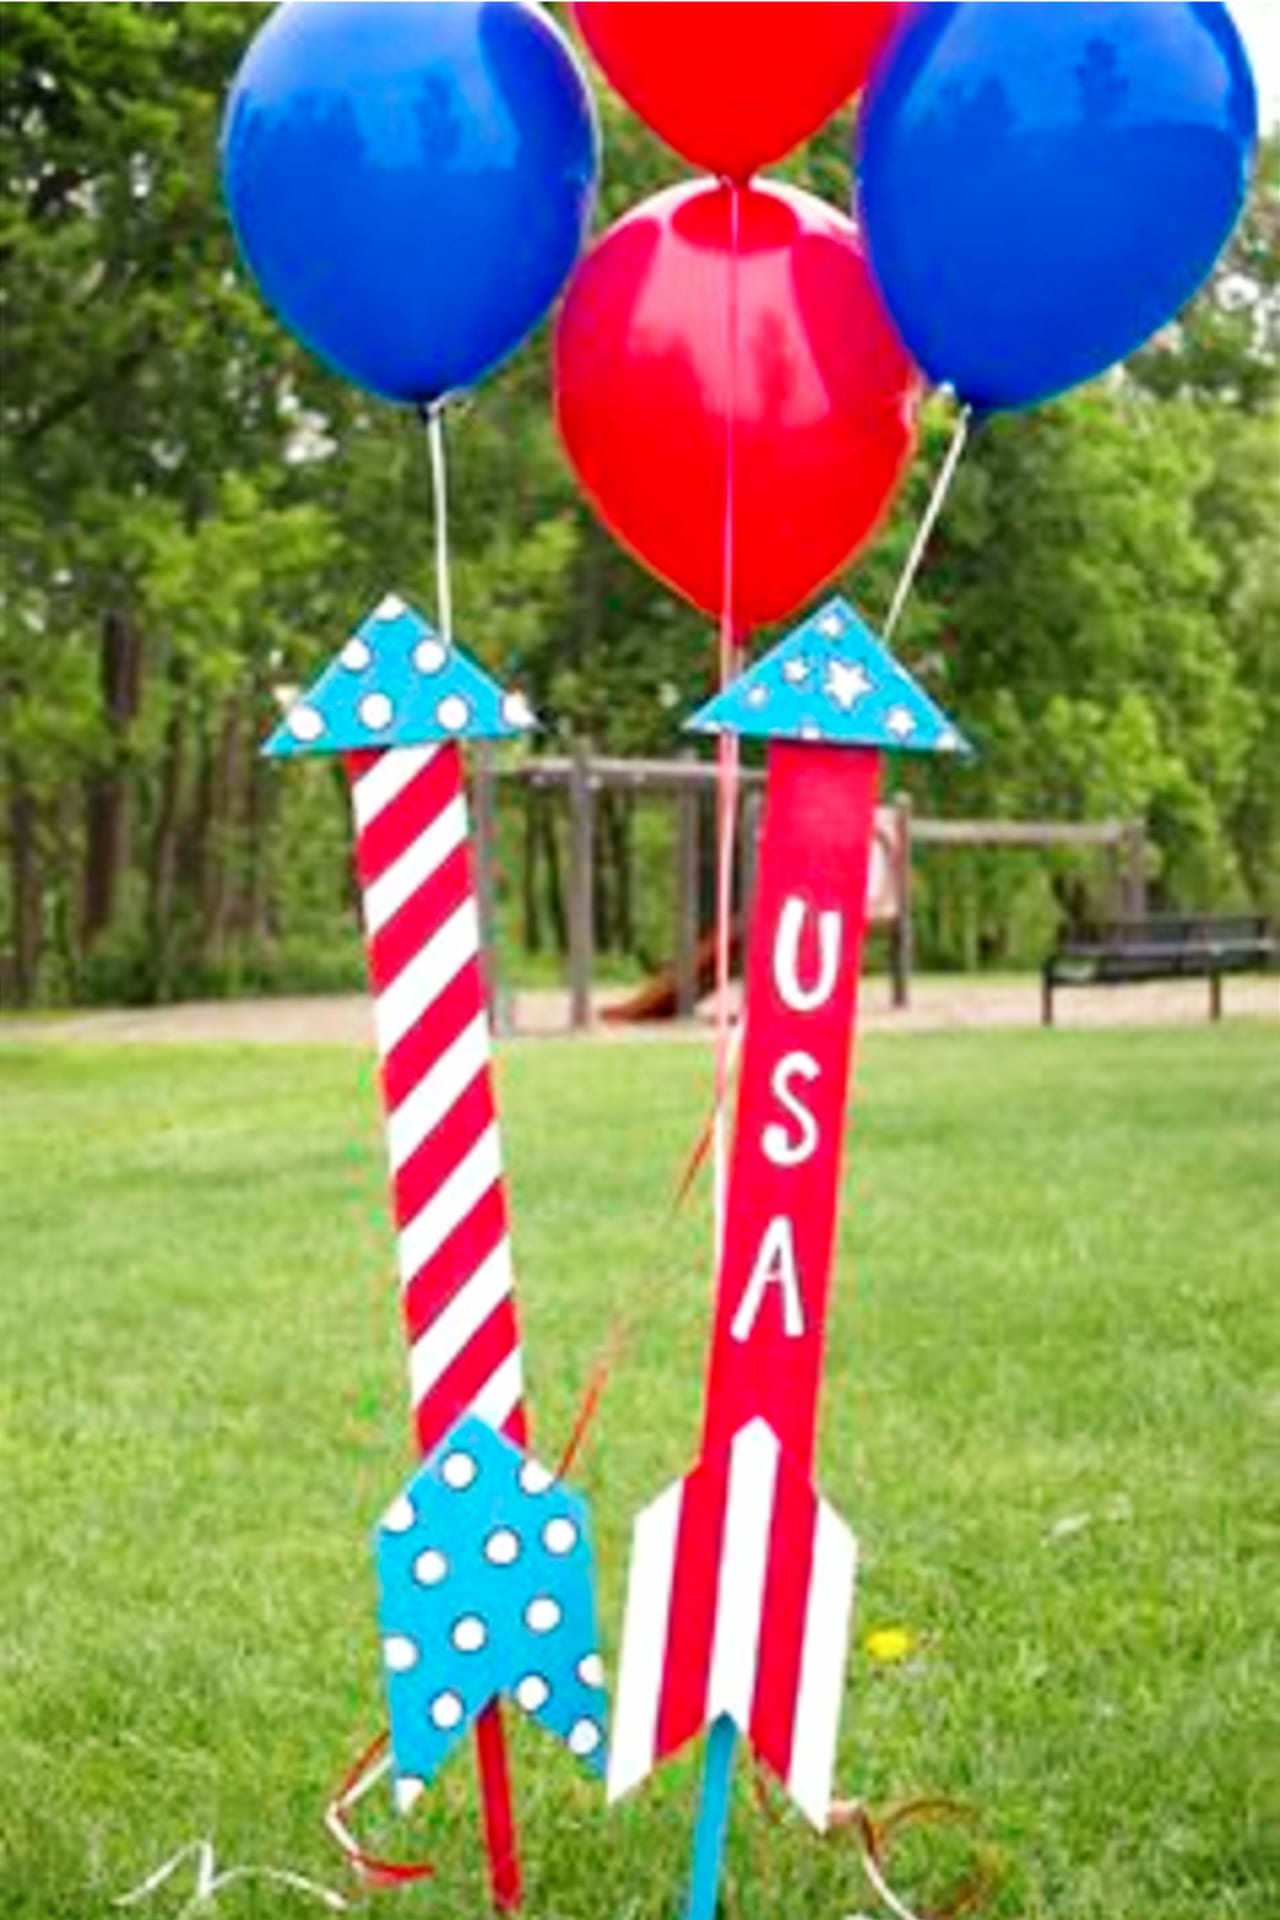 4th of July potluck party ideas for work picnic or party at home in the backyard